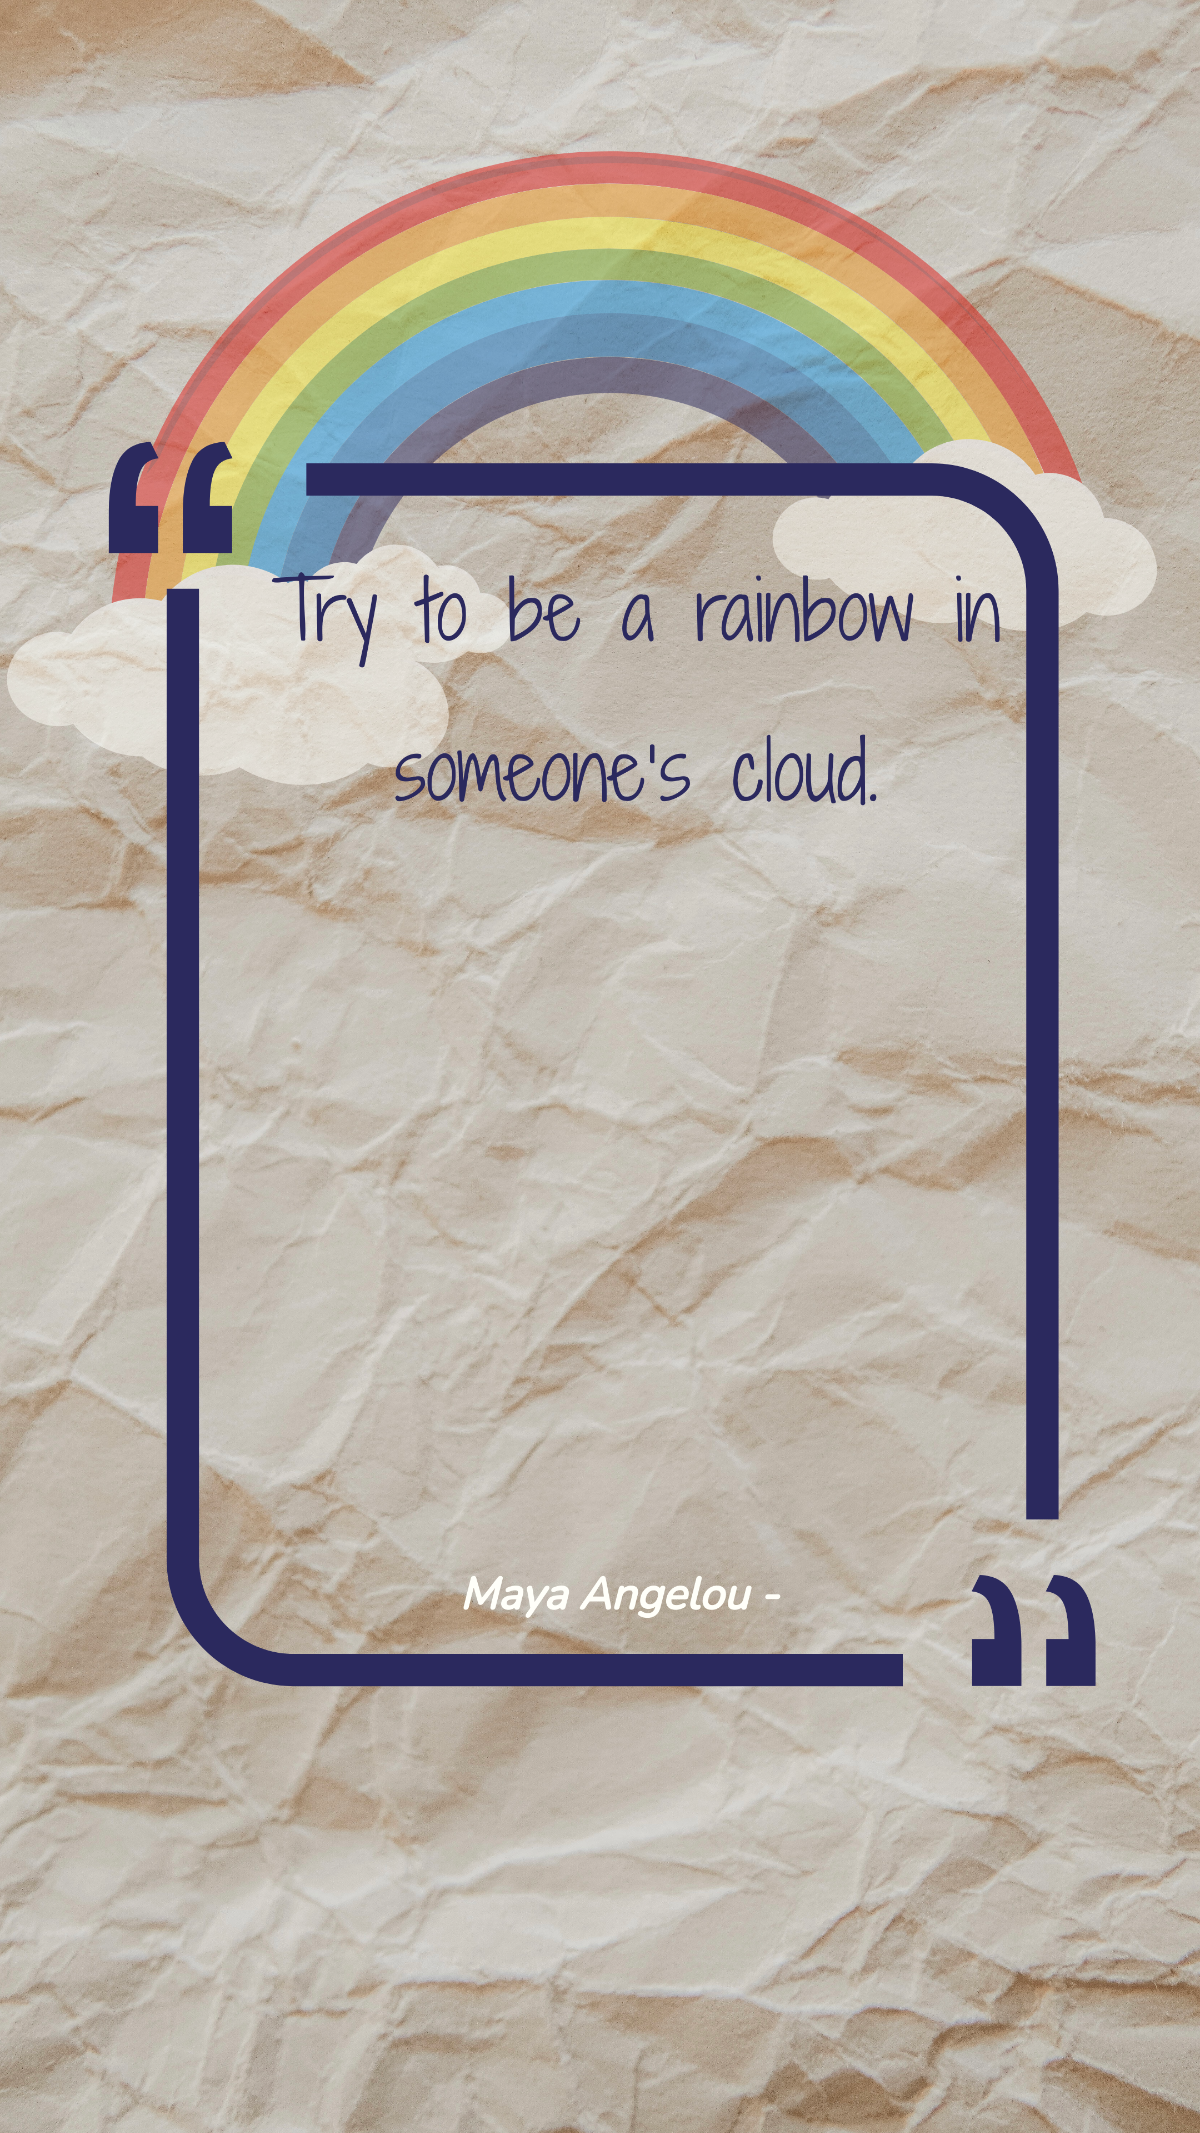 Maya Angelou - Try to be a rainbow in someone’s cloud.